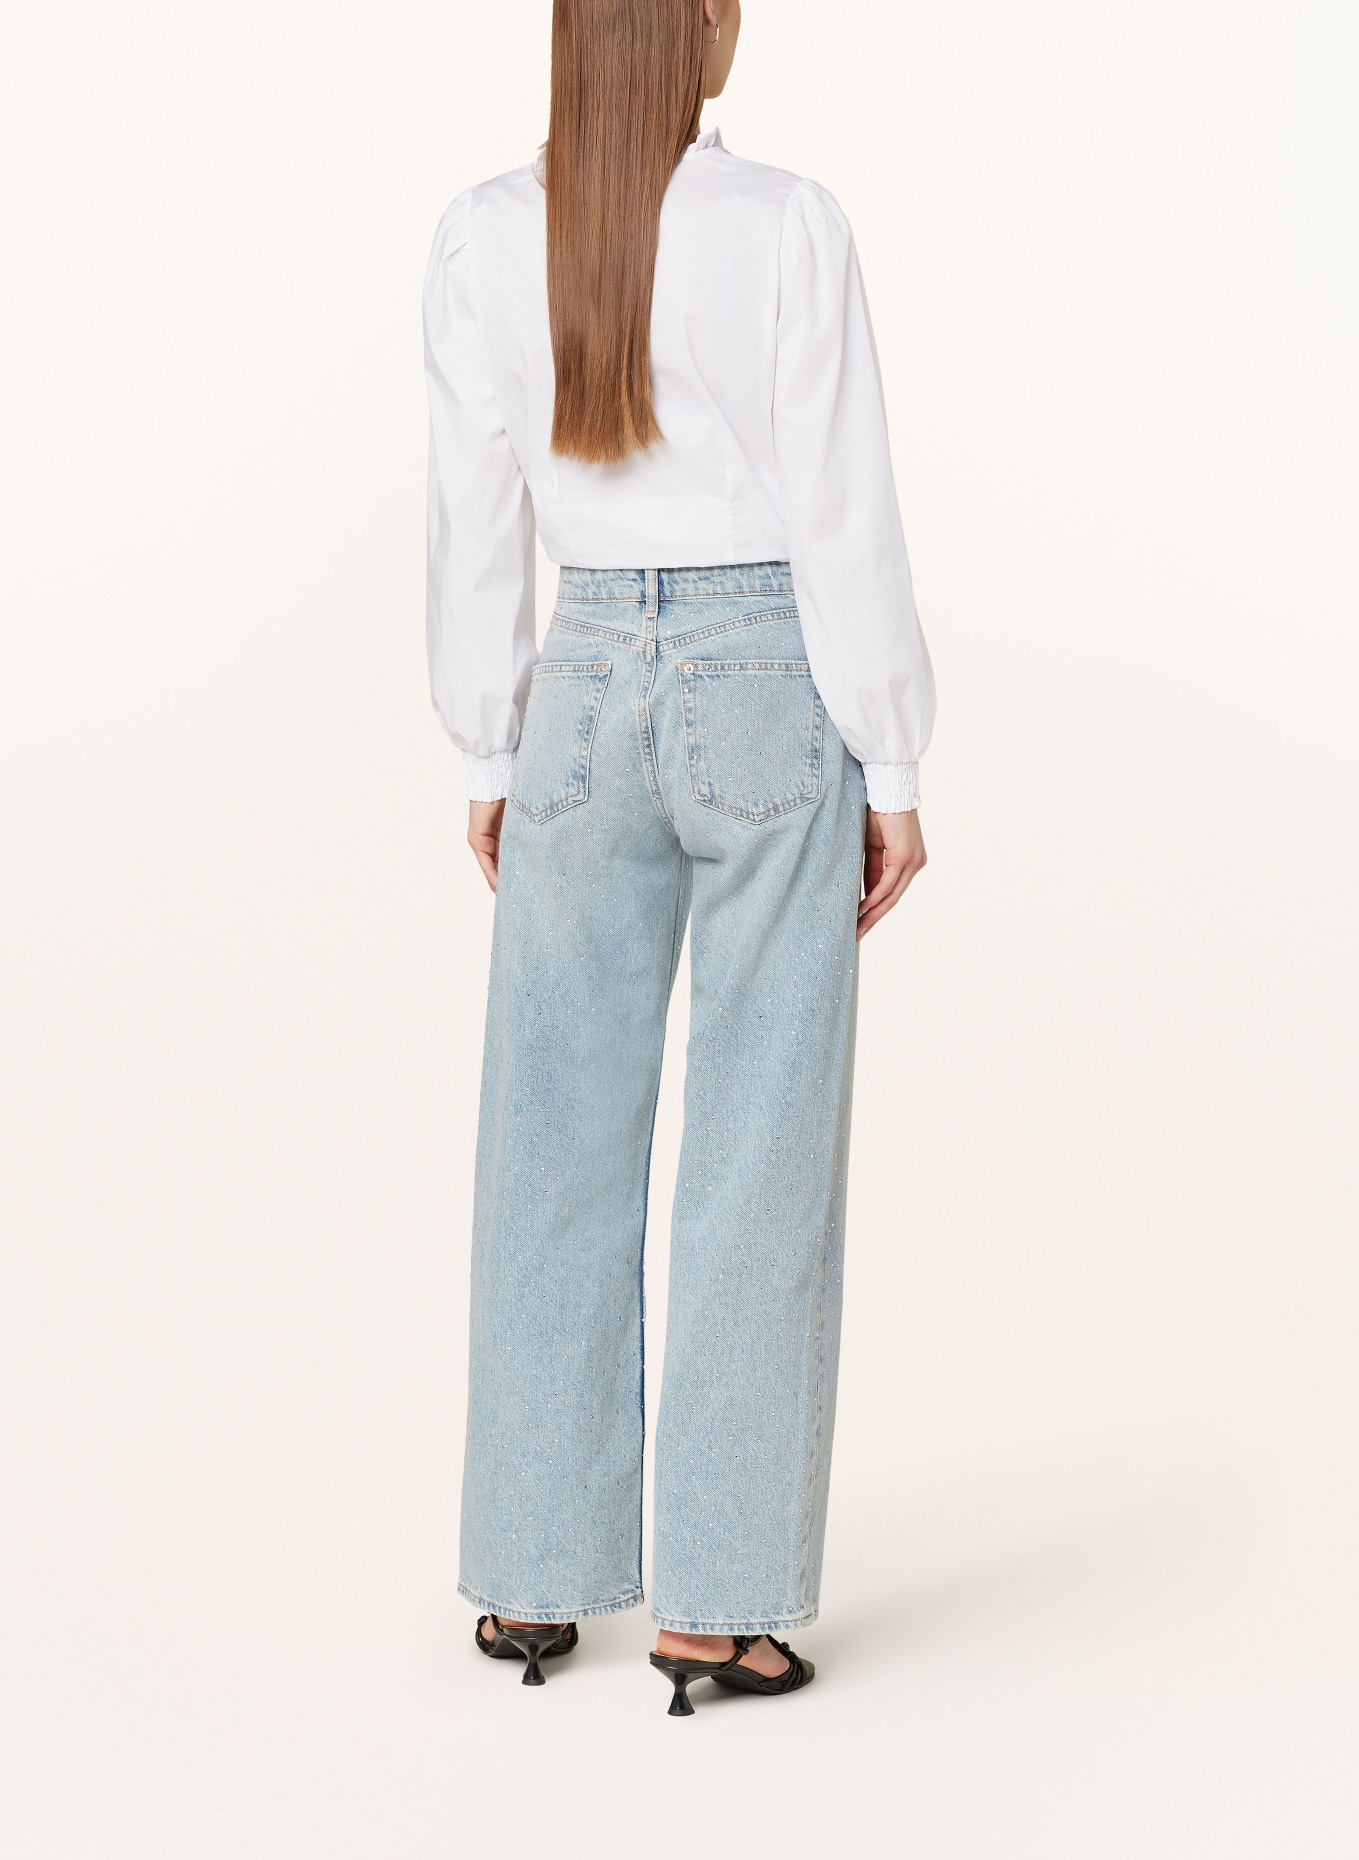 ONLY Straight jeans with decorative gems, Color: LIGHT BLUE DENIM (Image 3)